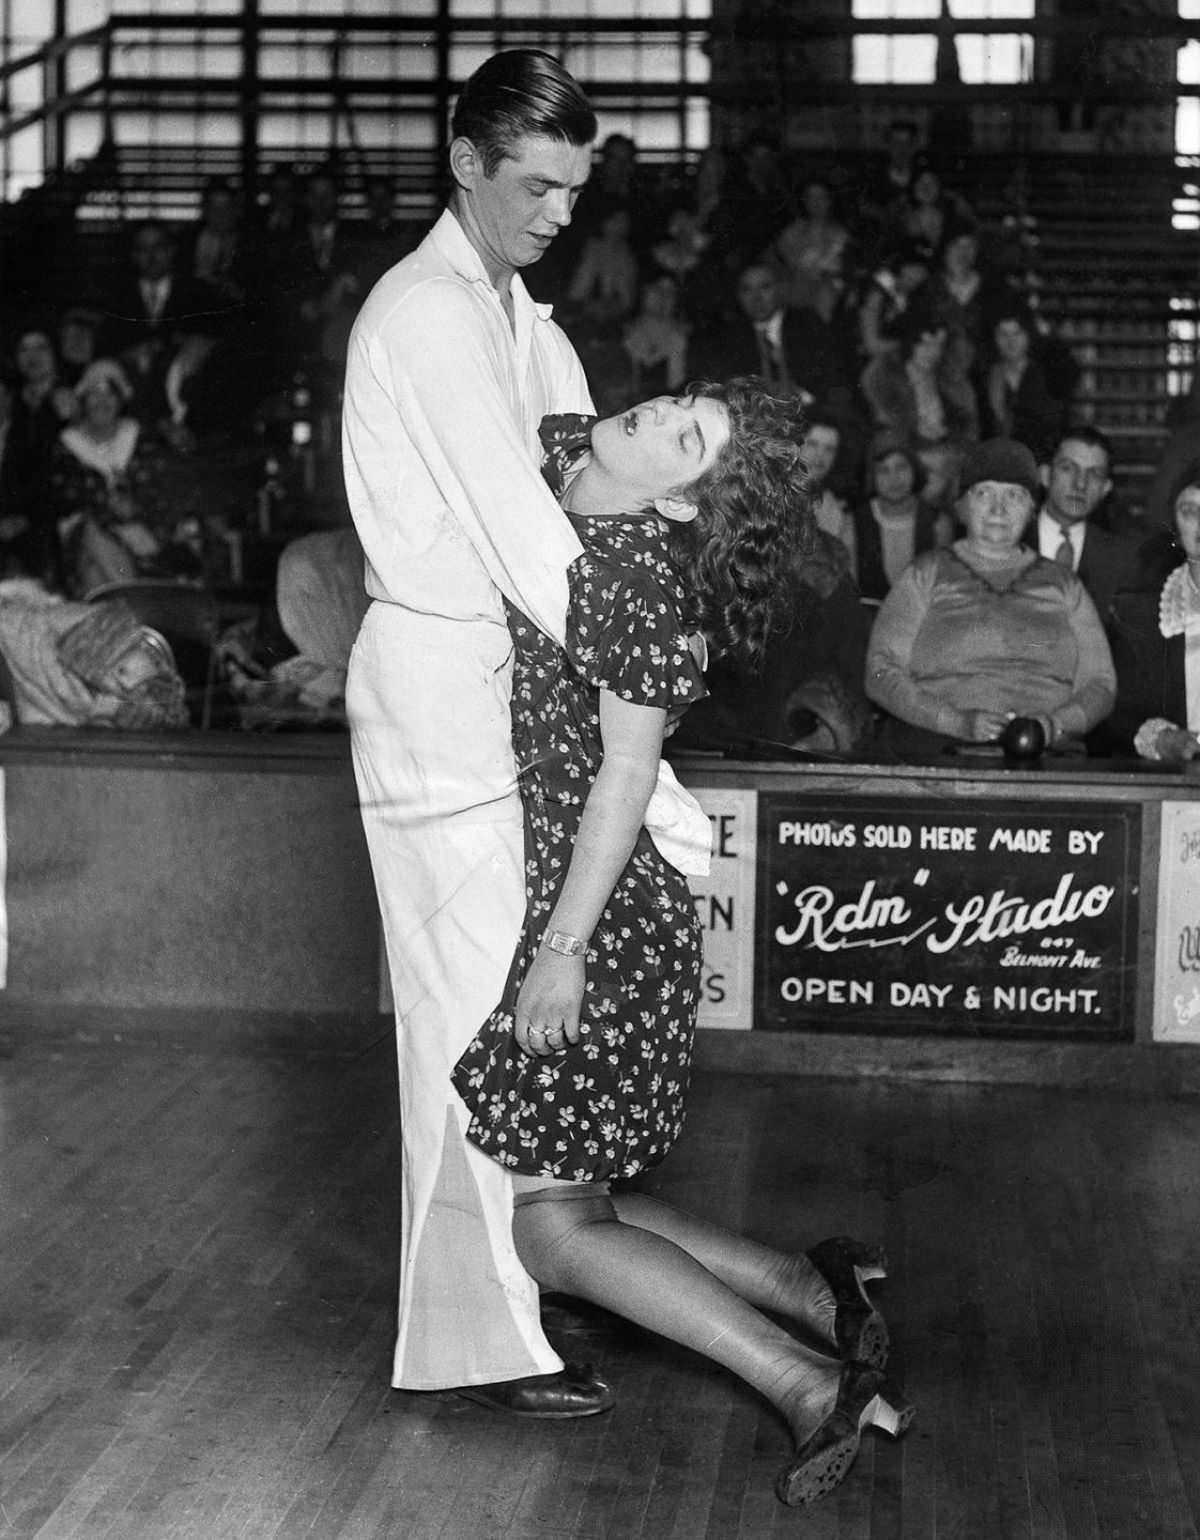 A dance until you drop contest in the US in 1947. You danced until you couldn't stand anymore and were eliminated if your knees touched the ground.